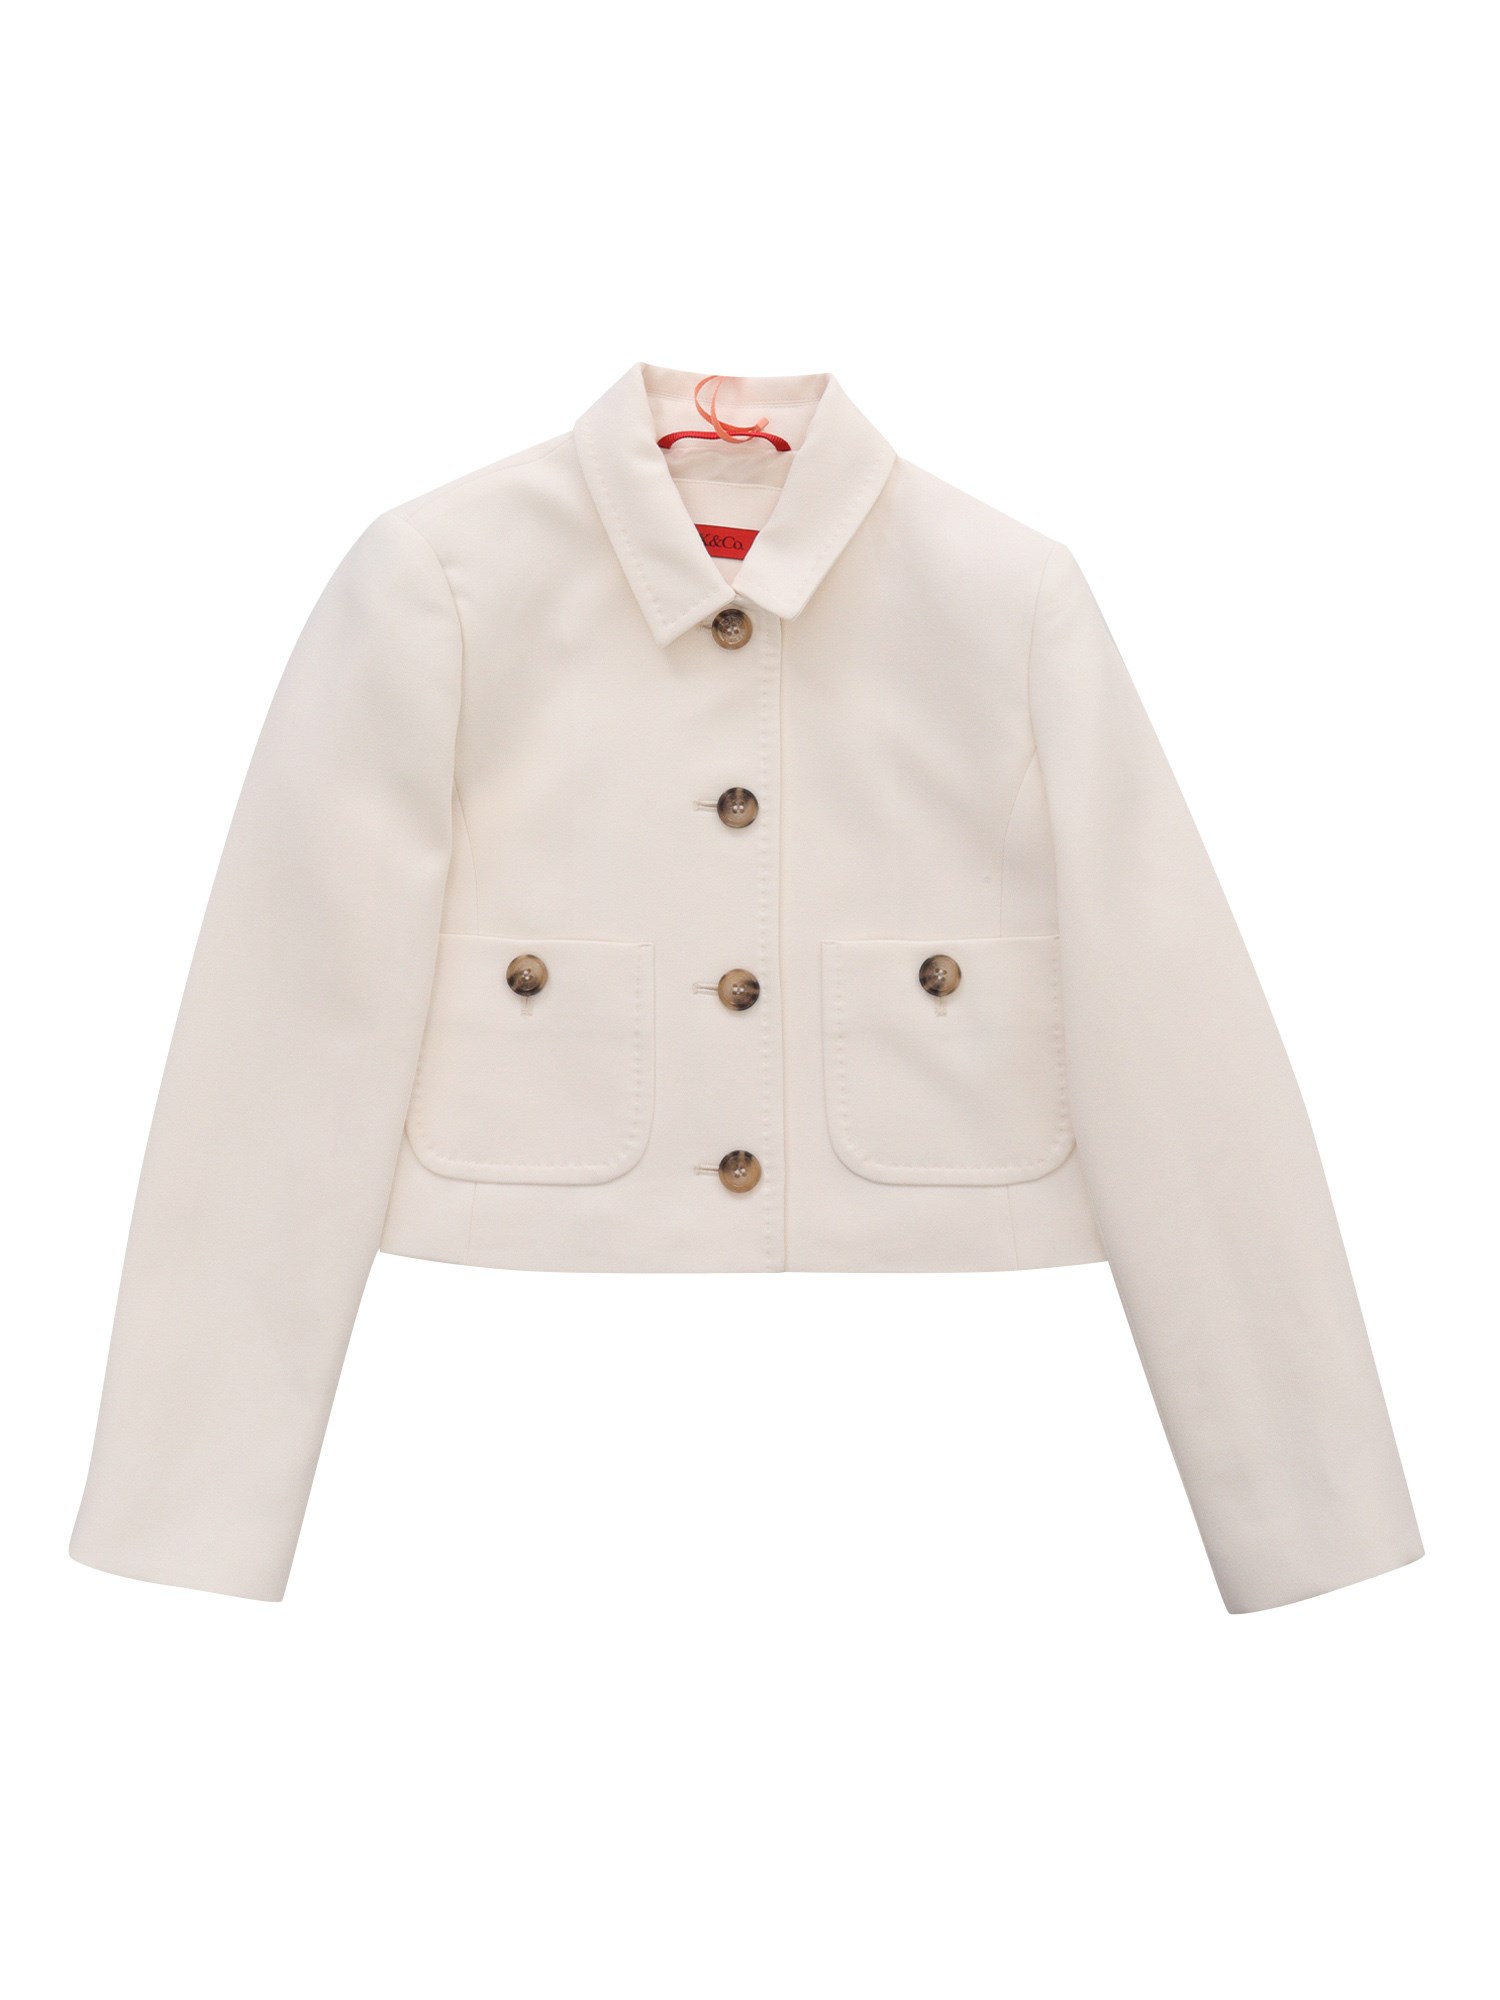 Max & Co White Cropped Jacket